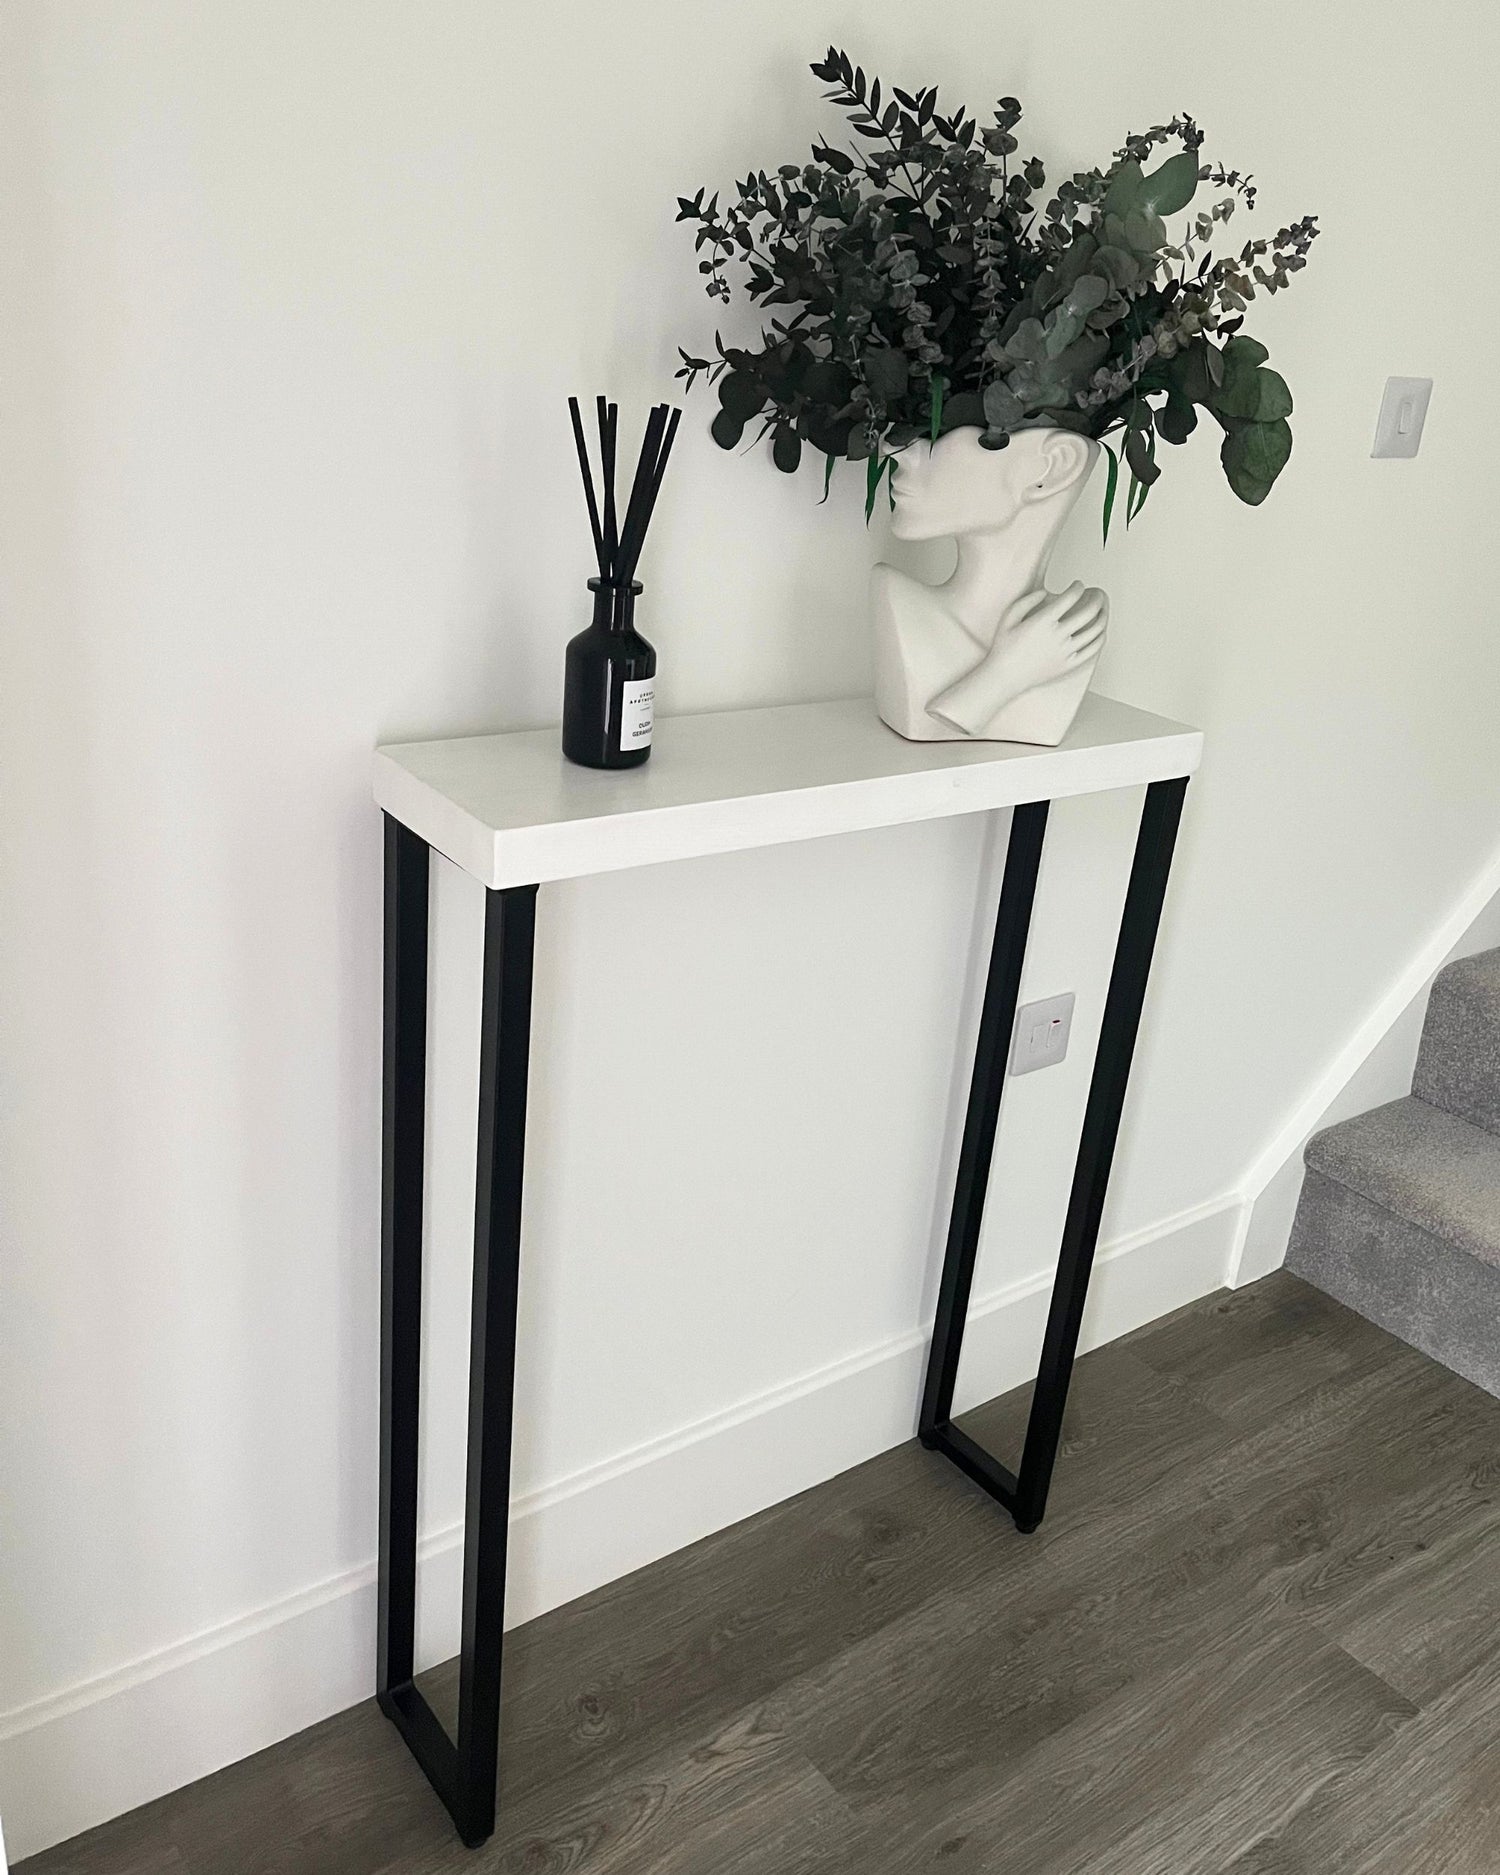 Joshua Rustic Wooden Radiator Shelf & Entry Console Table handcrafted in the UK - Box legs Shelves masterplank-shop   